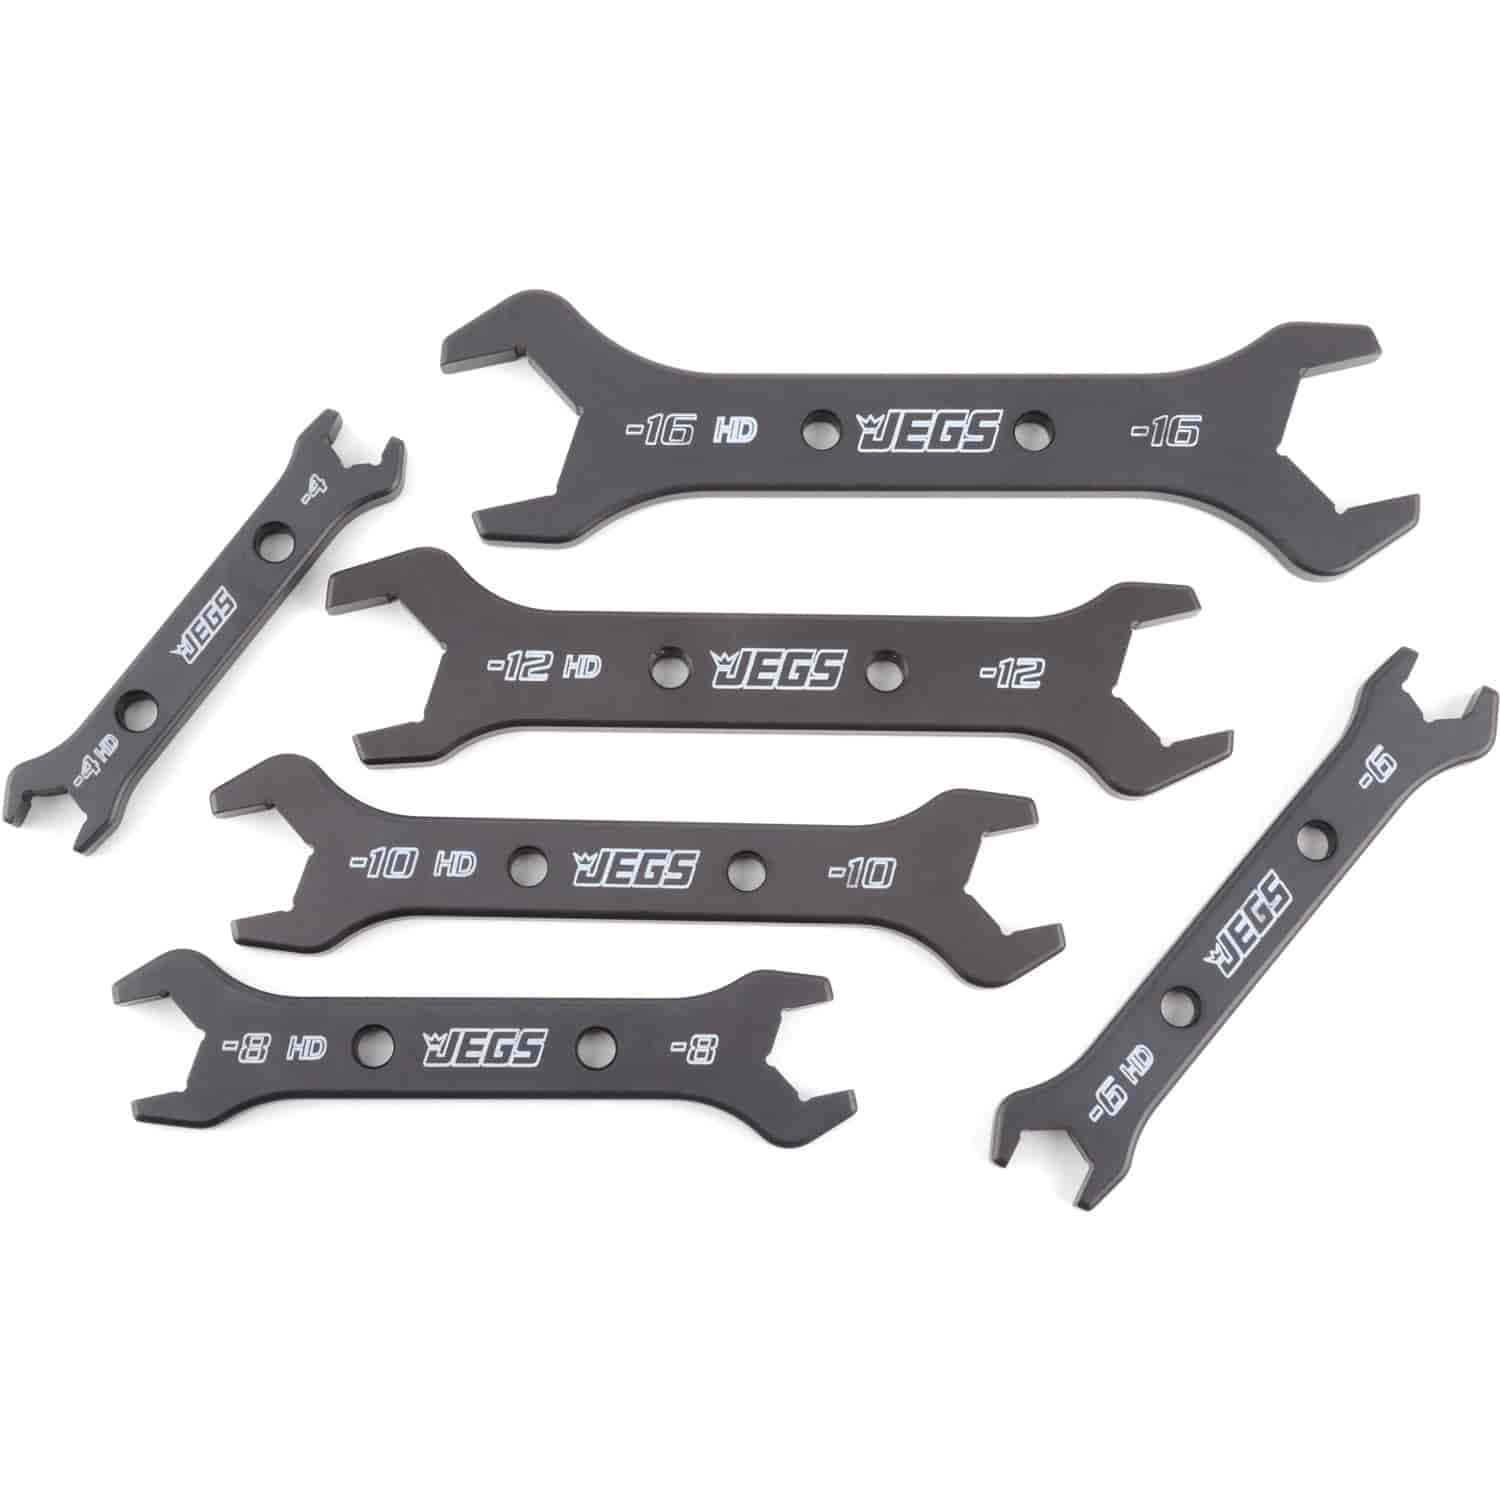 AN Combination Wrench Set Includes -4AN to -16AN HD to Standard Wrenches